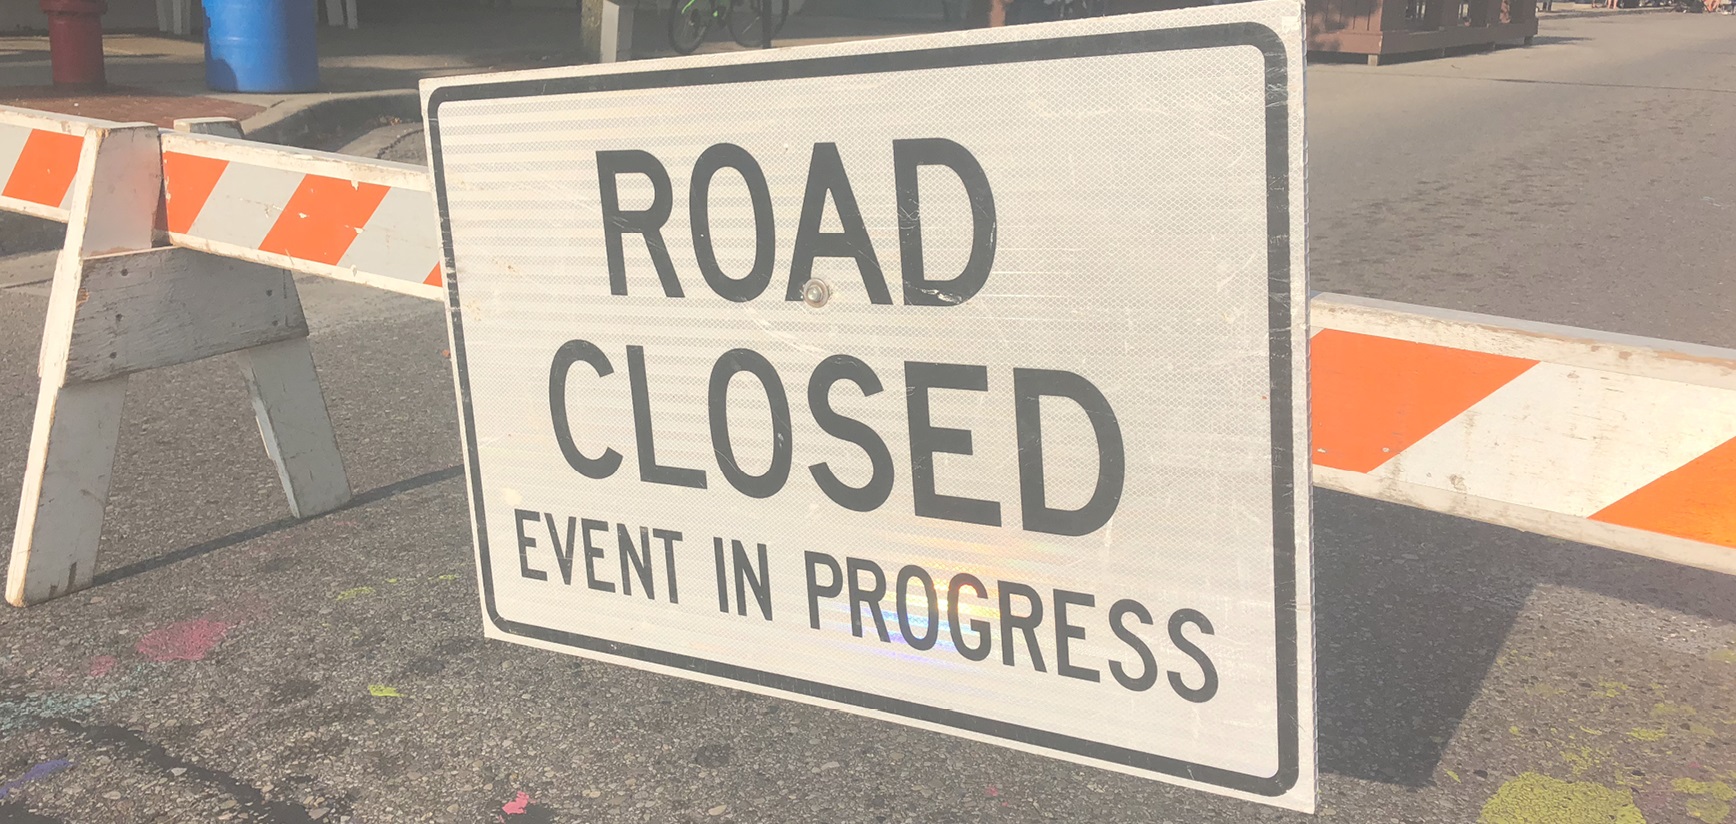 Road closed for event sign